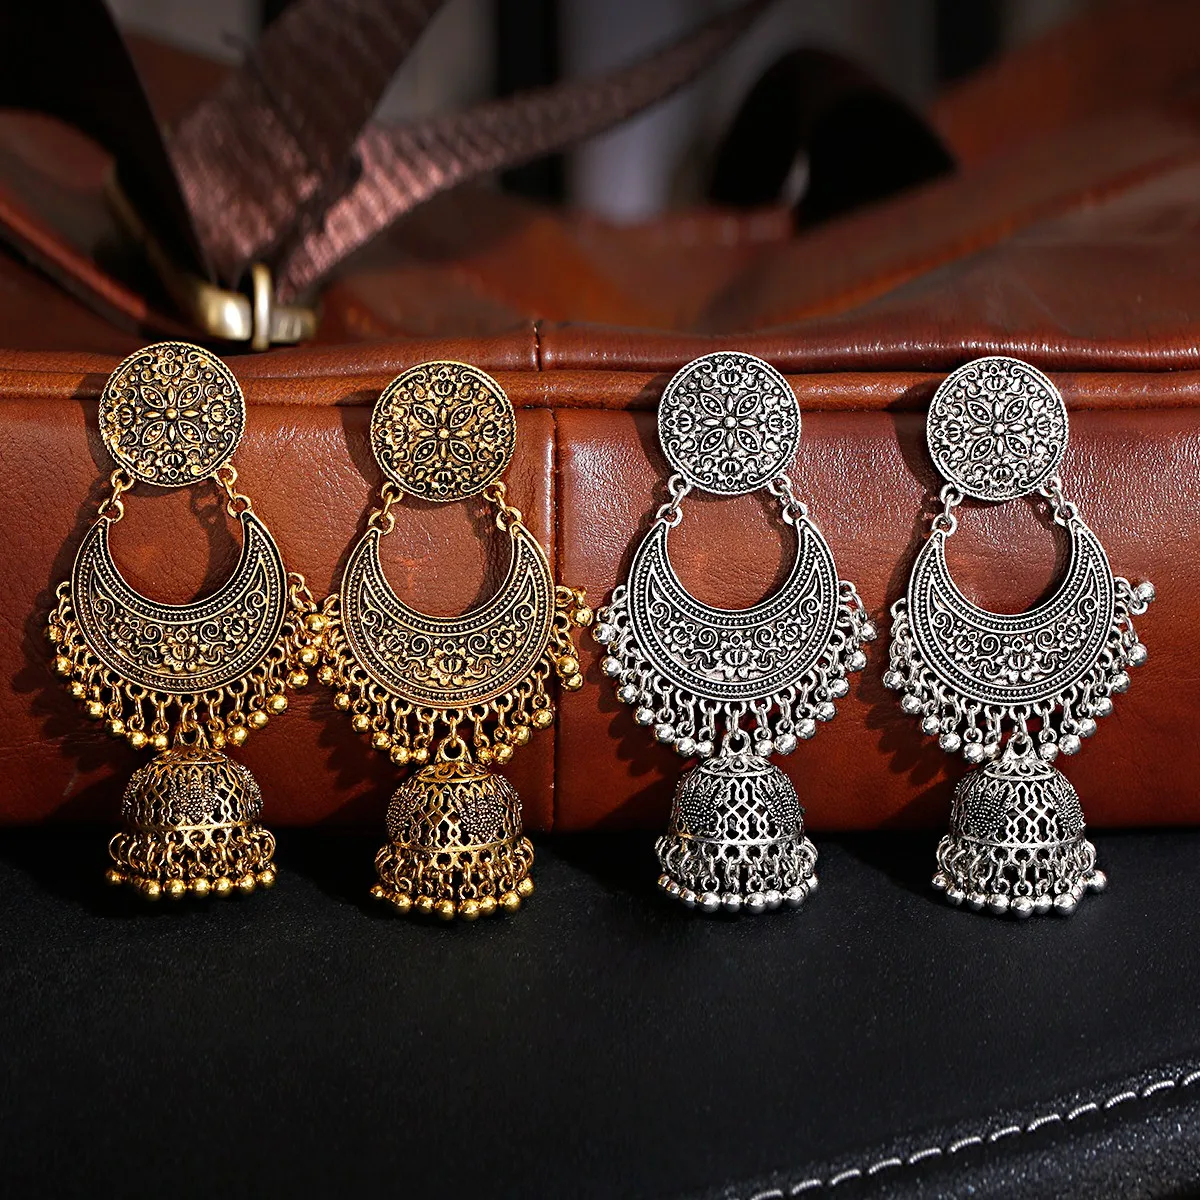 

Bollywood Oxidized Women Jhumka Indian Earrings Ethnic Gold Silver Color Half Month Carved Big Bell Long Tassel Earrings